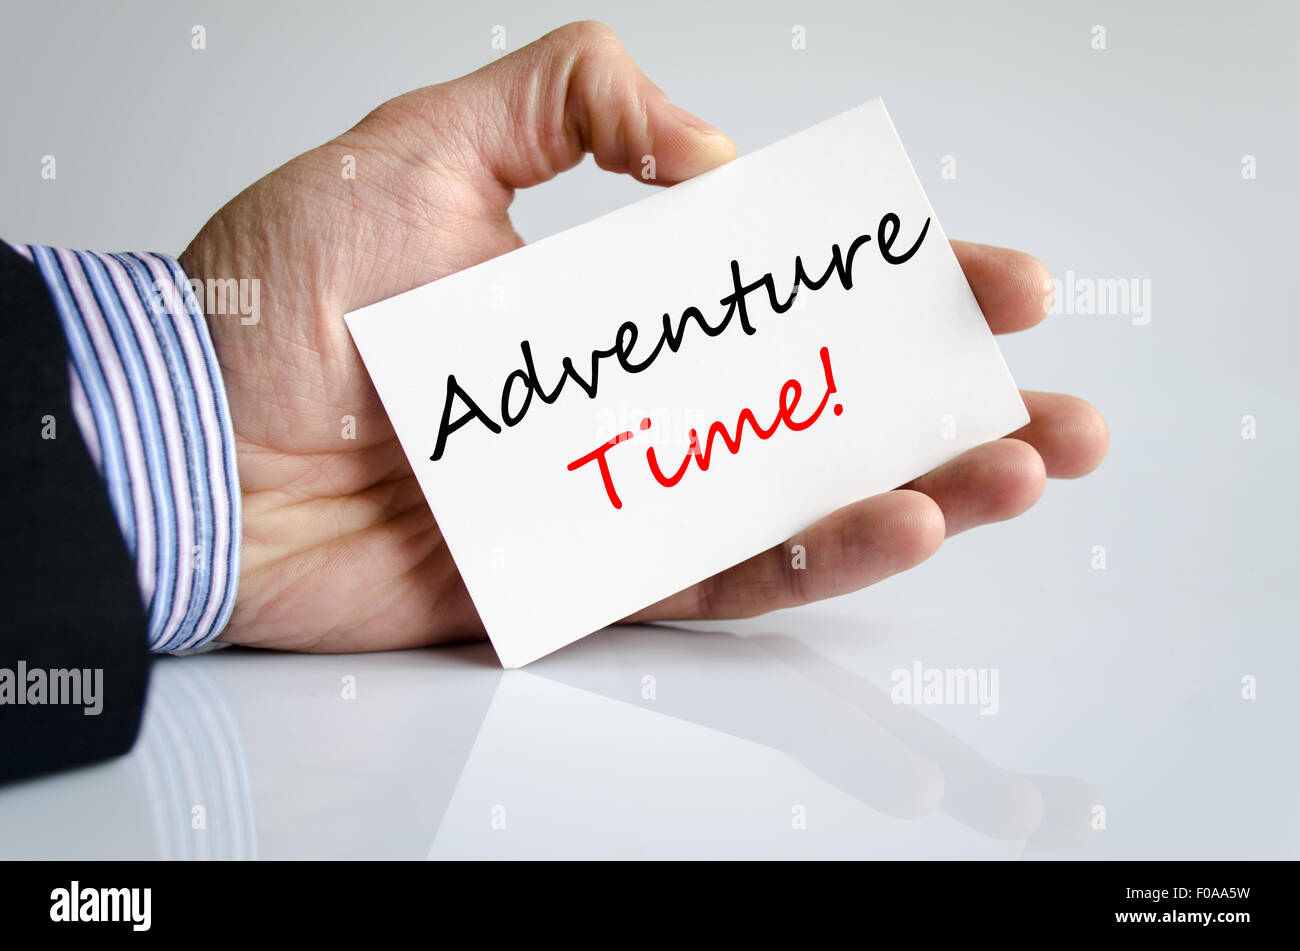 Adventure time text concept isolated over white background Stock Photo